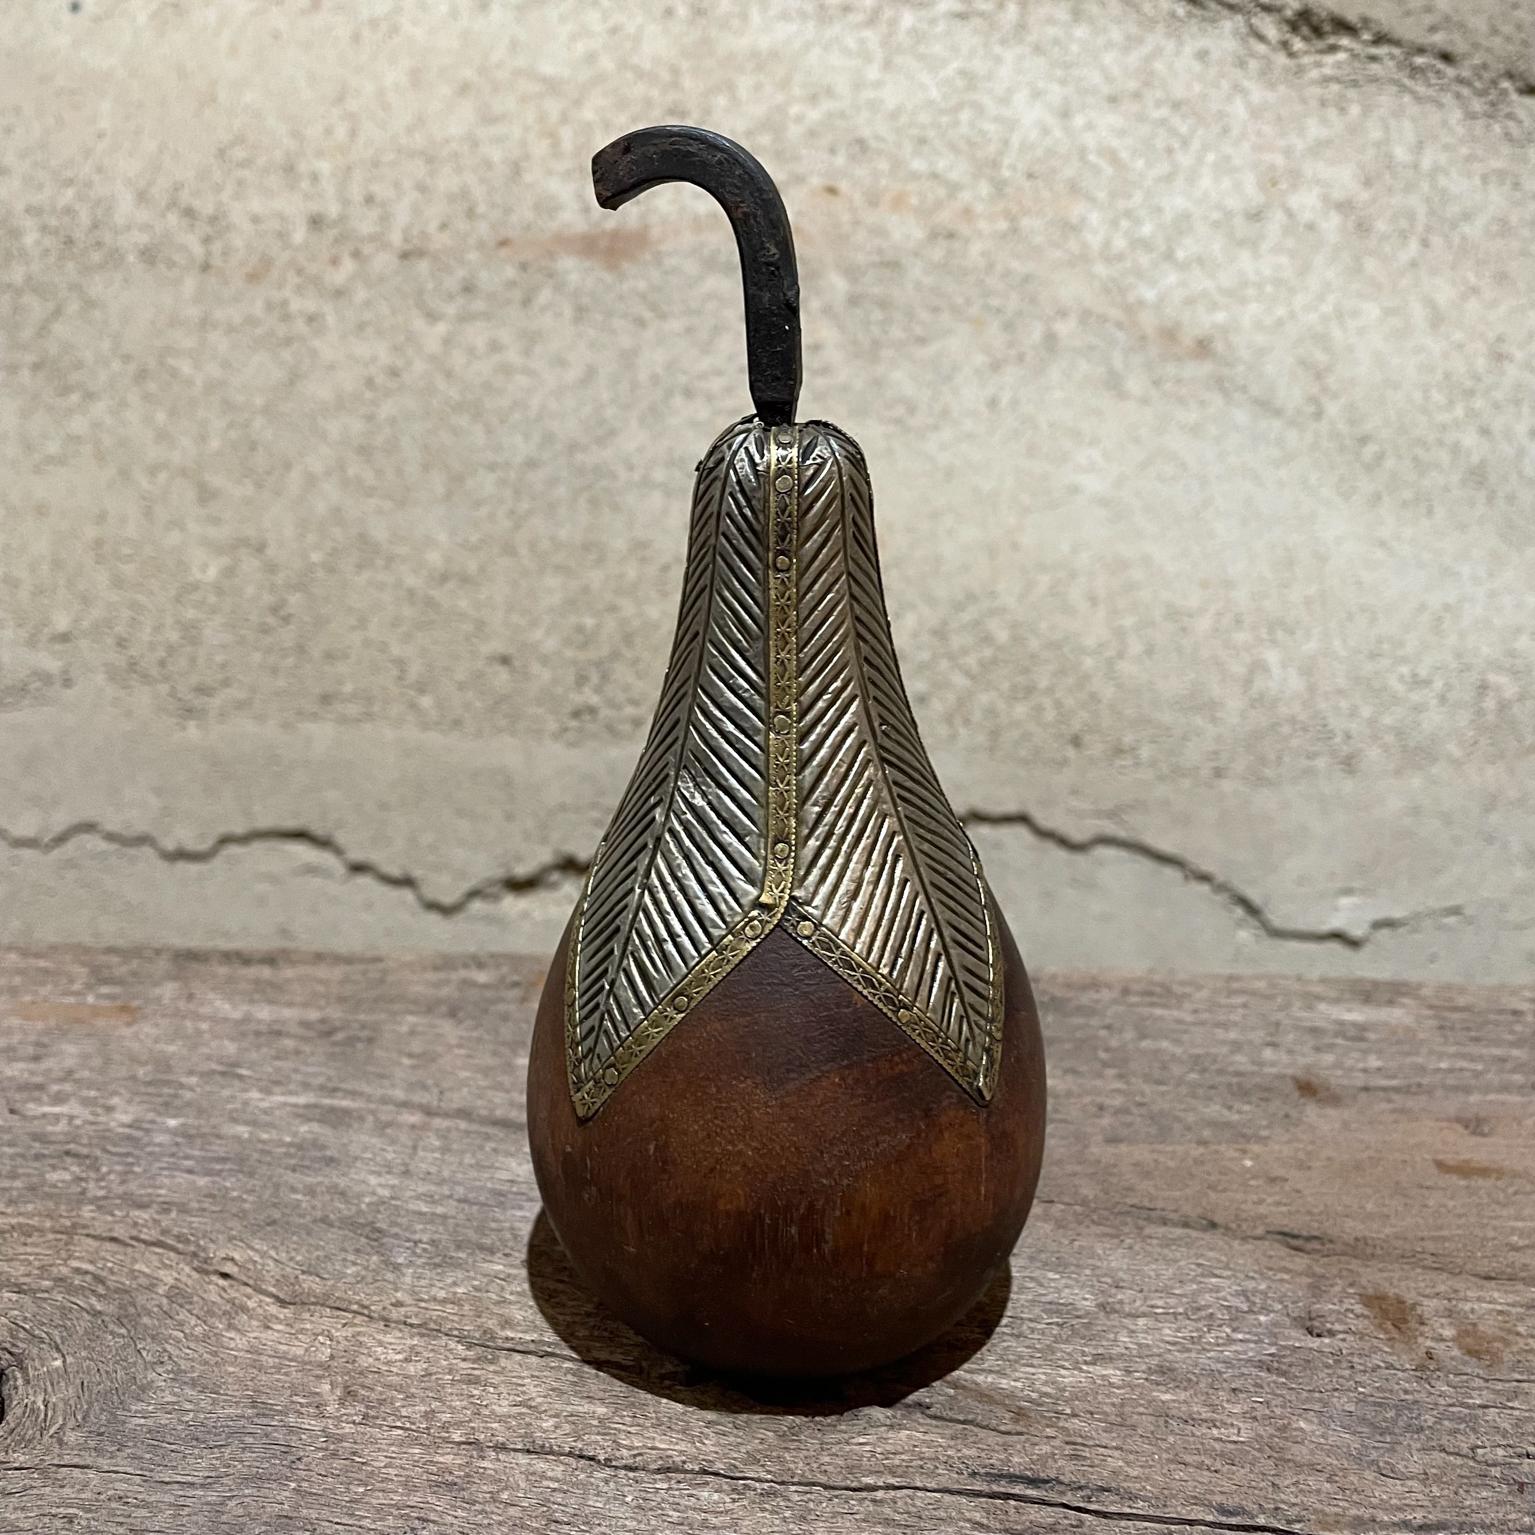 Mexican Vintage Decorative Pear Figurine Crafted in Wood and Hammered Metal Mexico 1970s